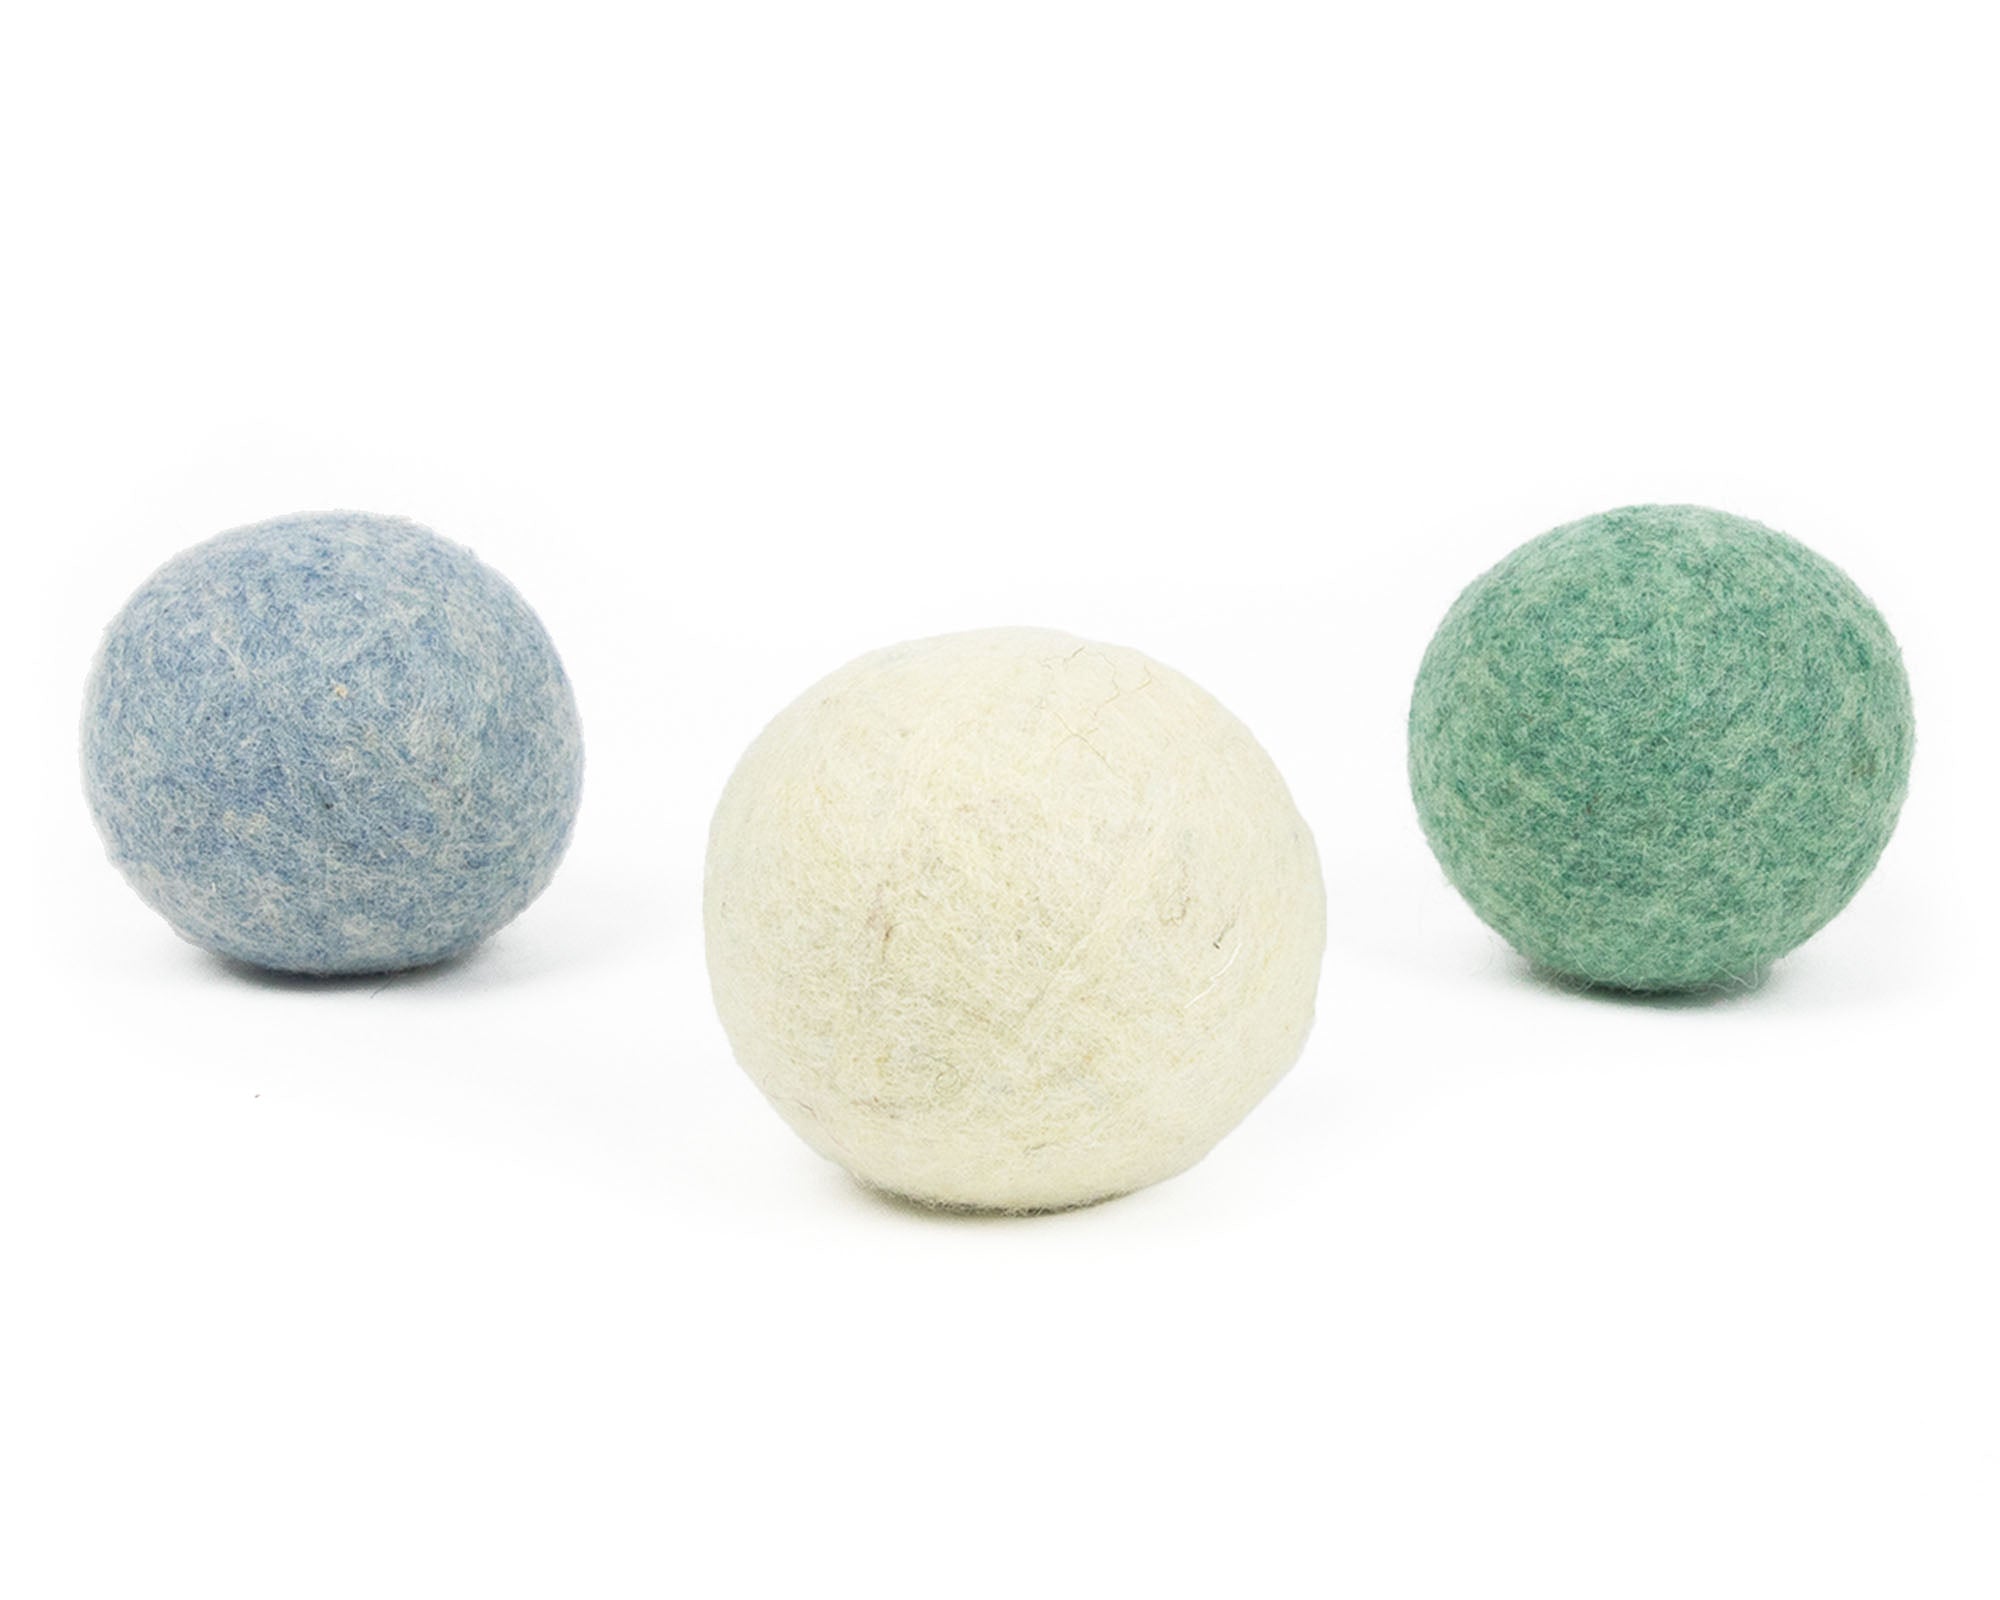 How to Make Wool Dryer Balls - So Easy! Makes a great Gift!